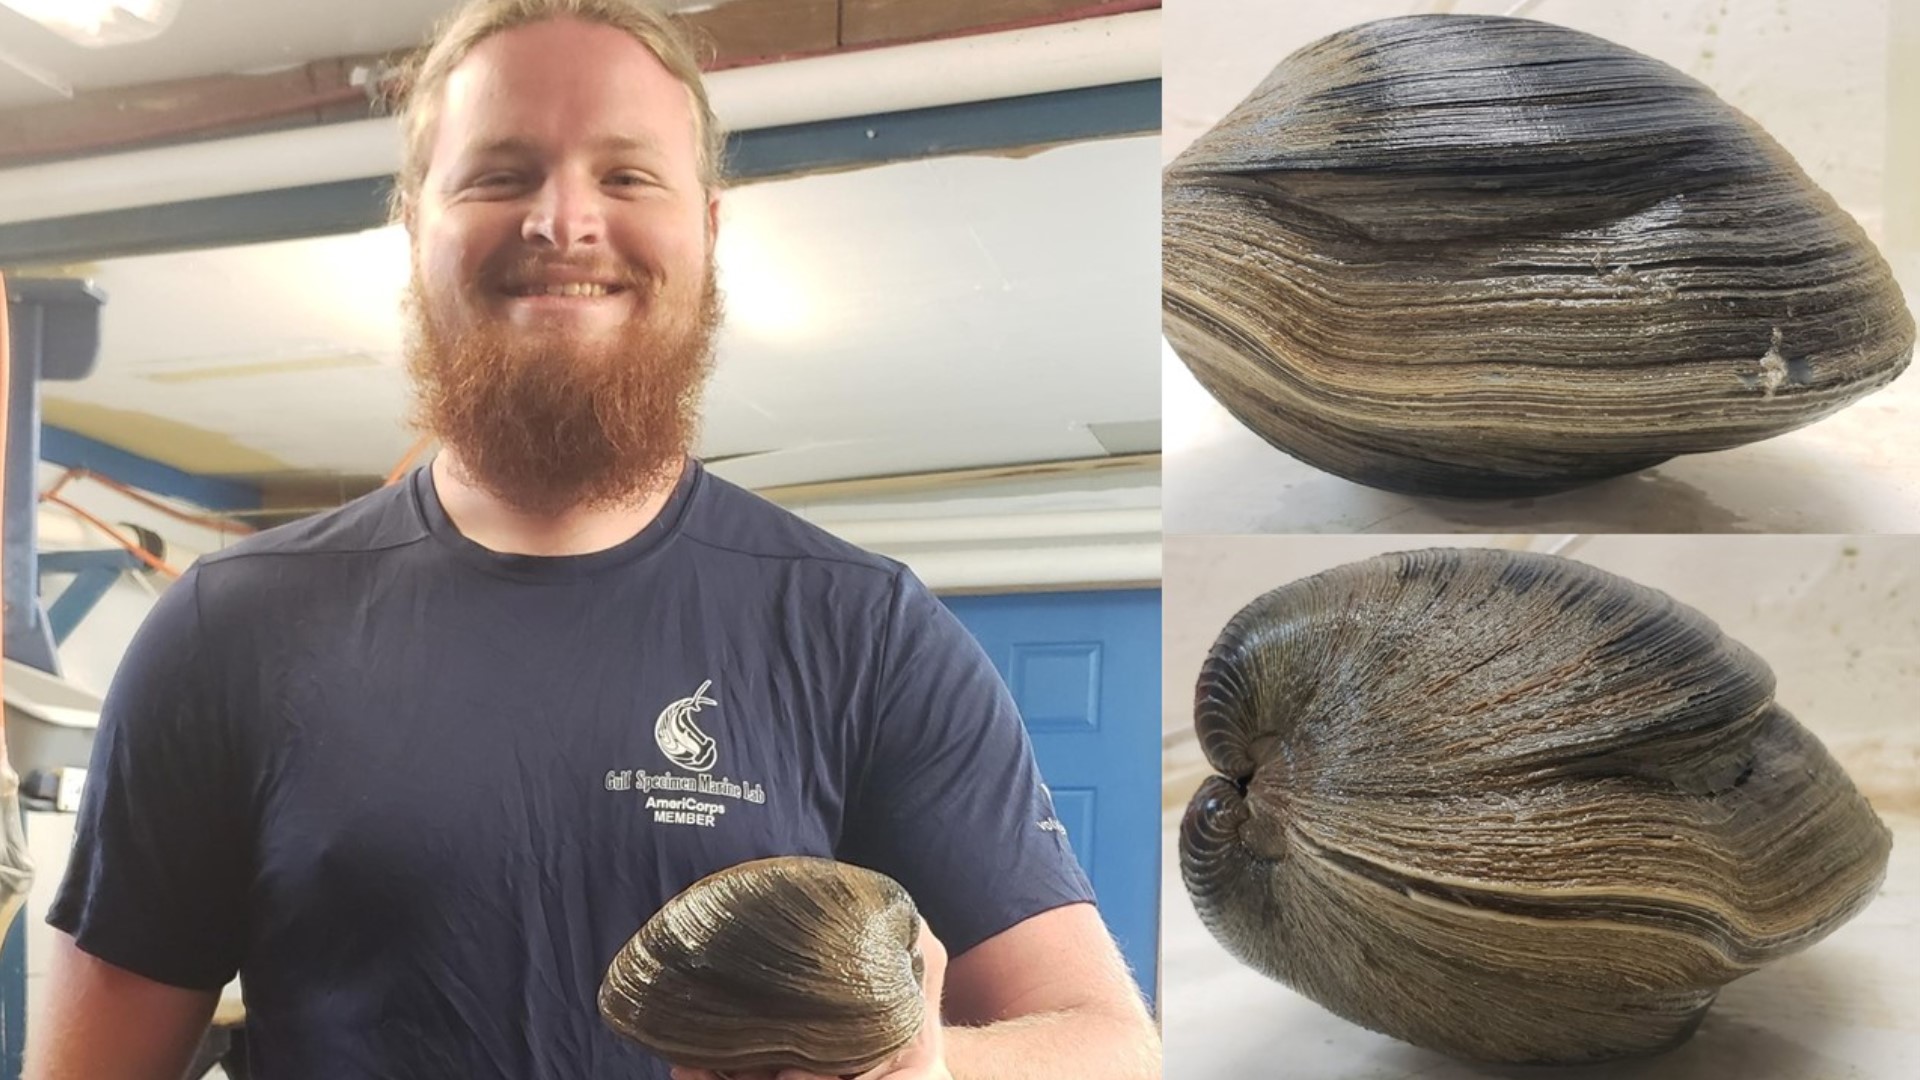 The clam, which was named "Aber-clam Lincoln," measured up to 6 inches and 2.6 pounds.